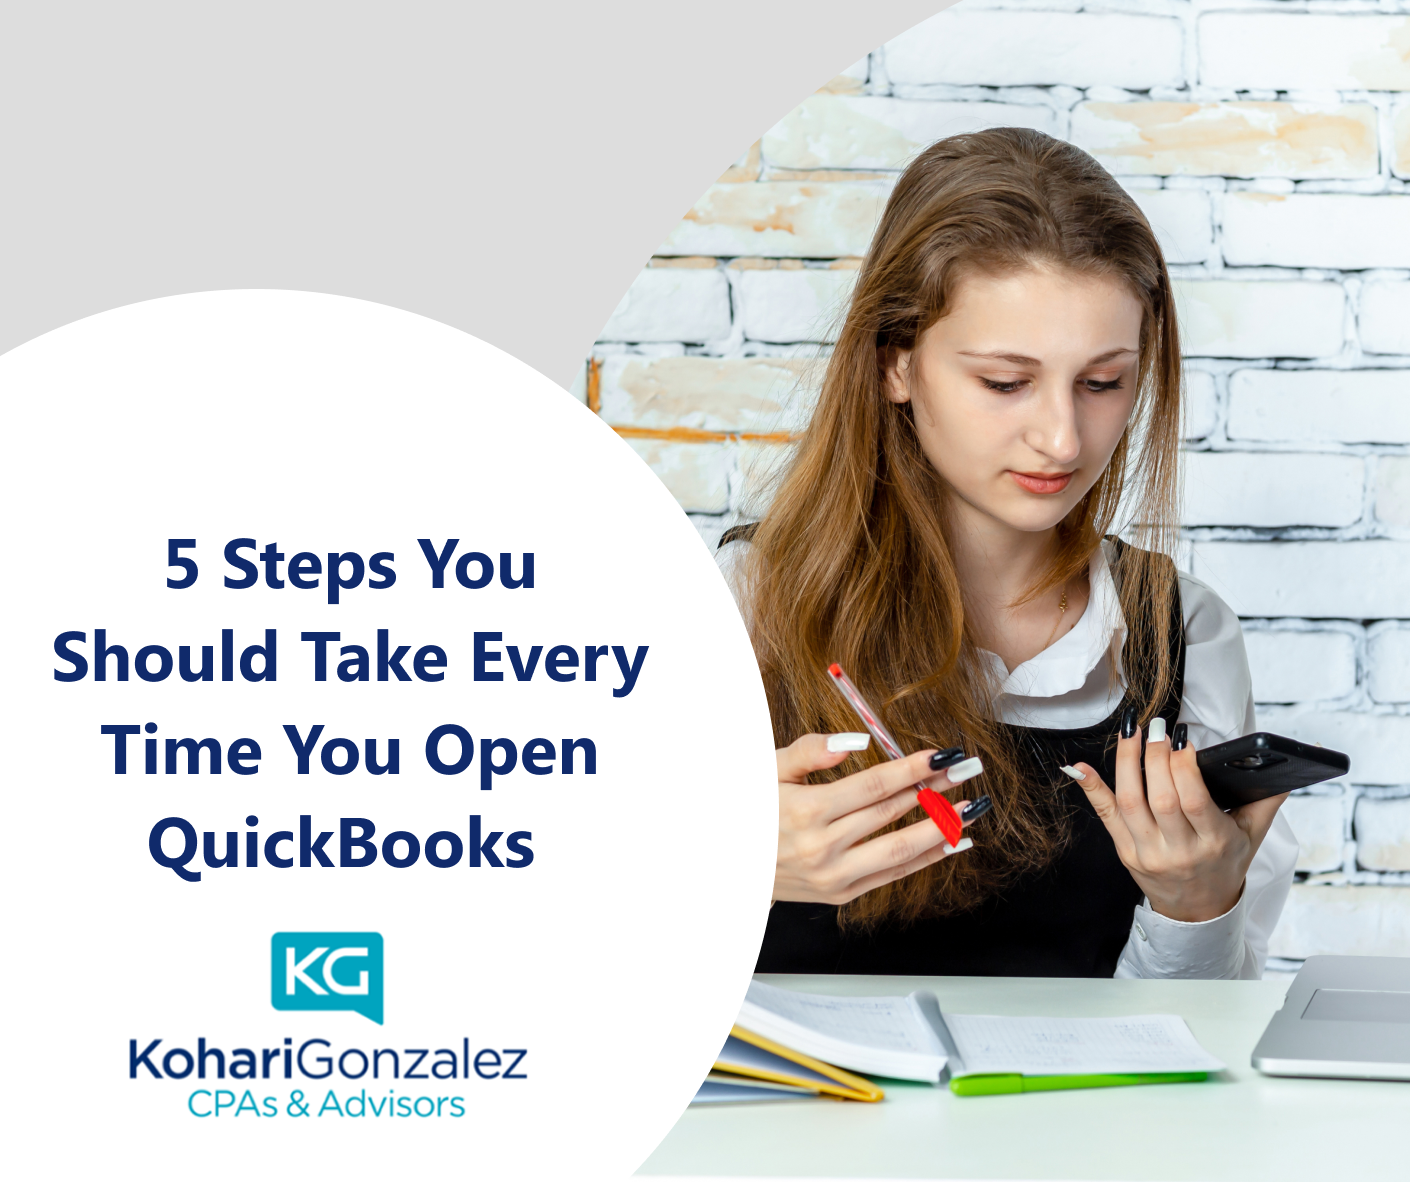 5 Steps You Should Take Every Time You Open QuickBooks